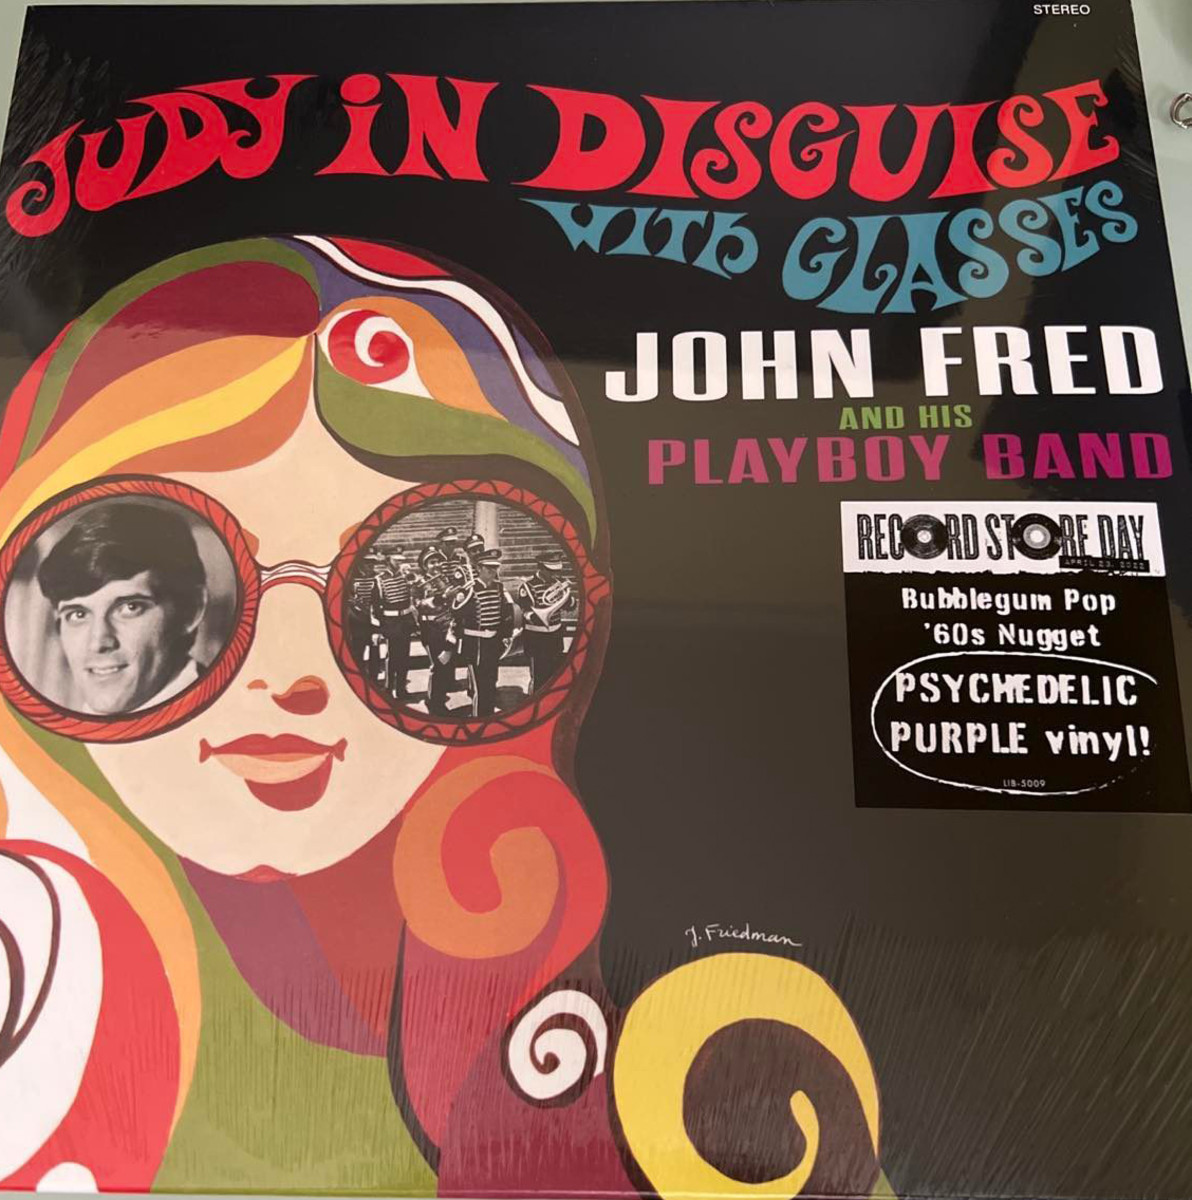 John Fred and His Playboy Band never had their albums reissued on vinyl until RSD, especially not purple psychedelic vinyl! Only 1,000 pressed!